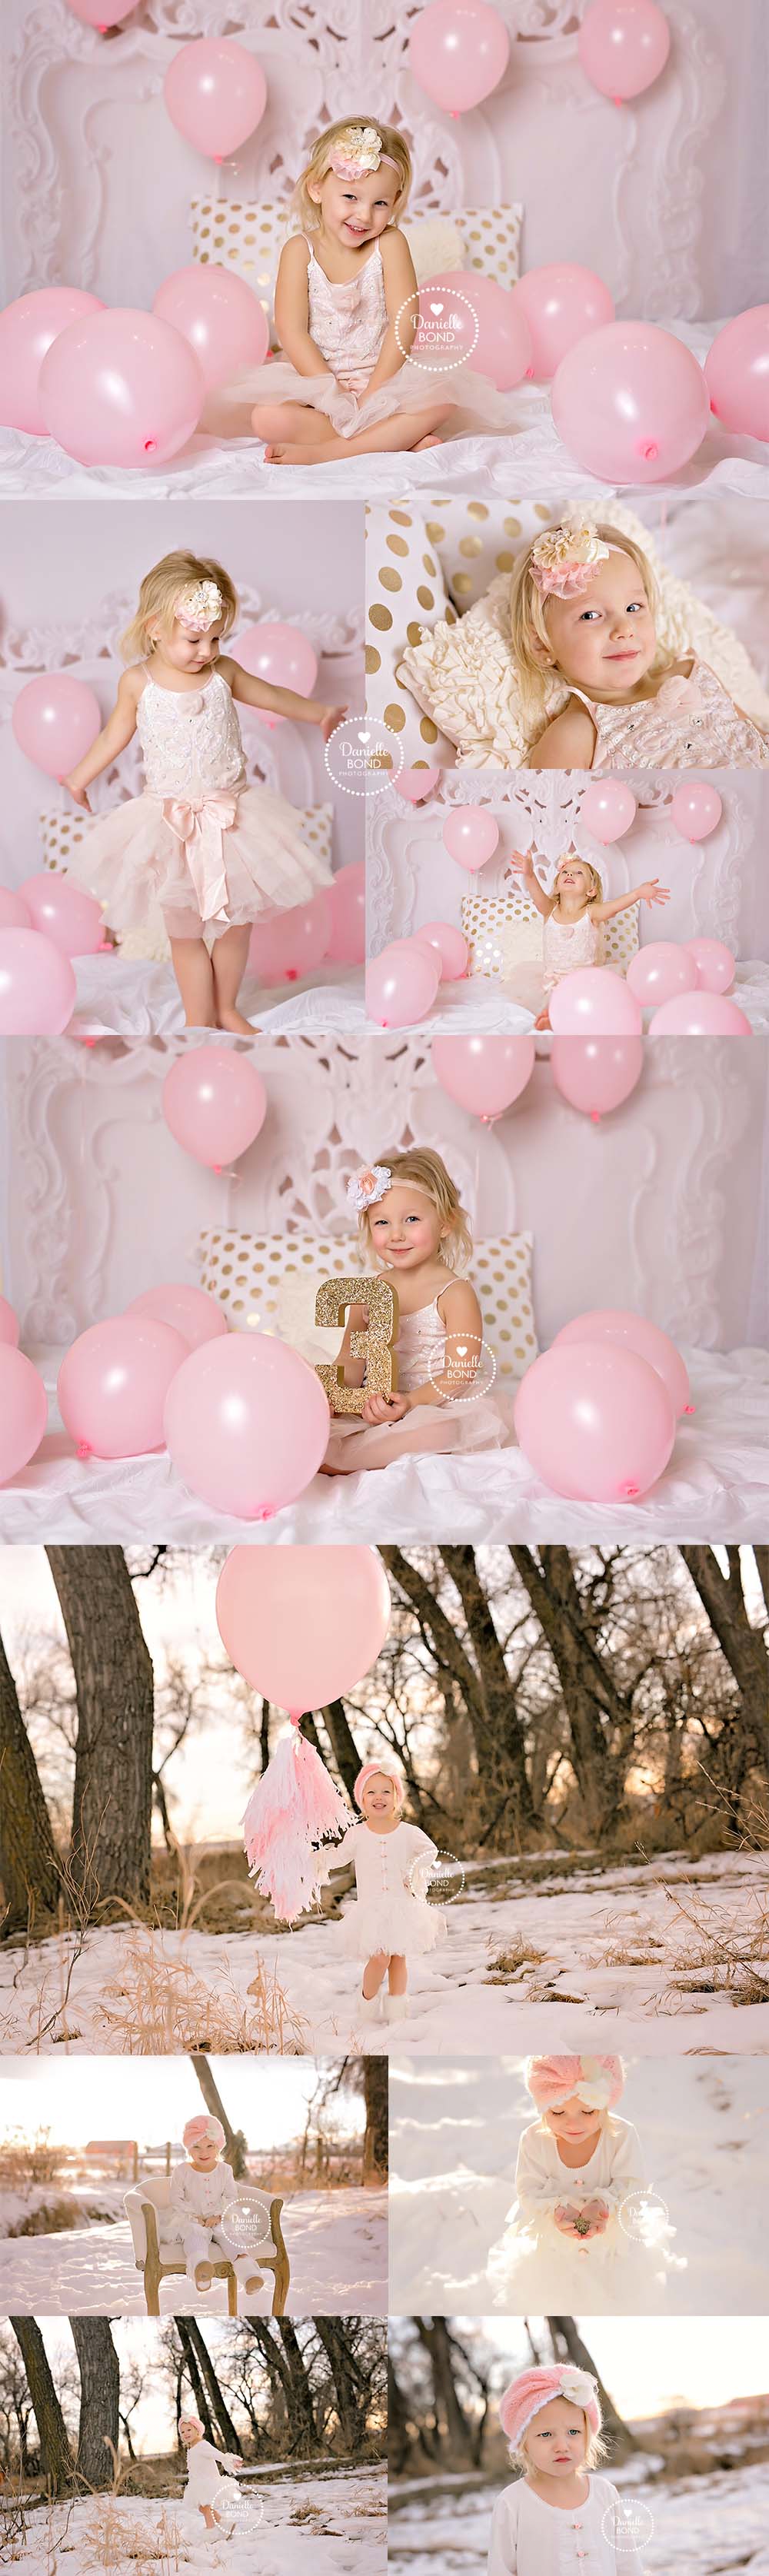 whimsical child photos by Denver, CO photographer